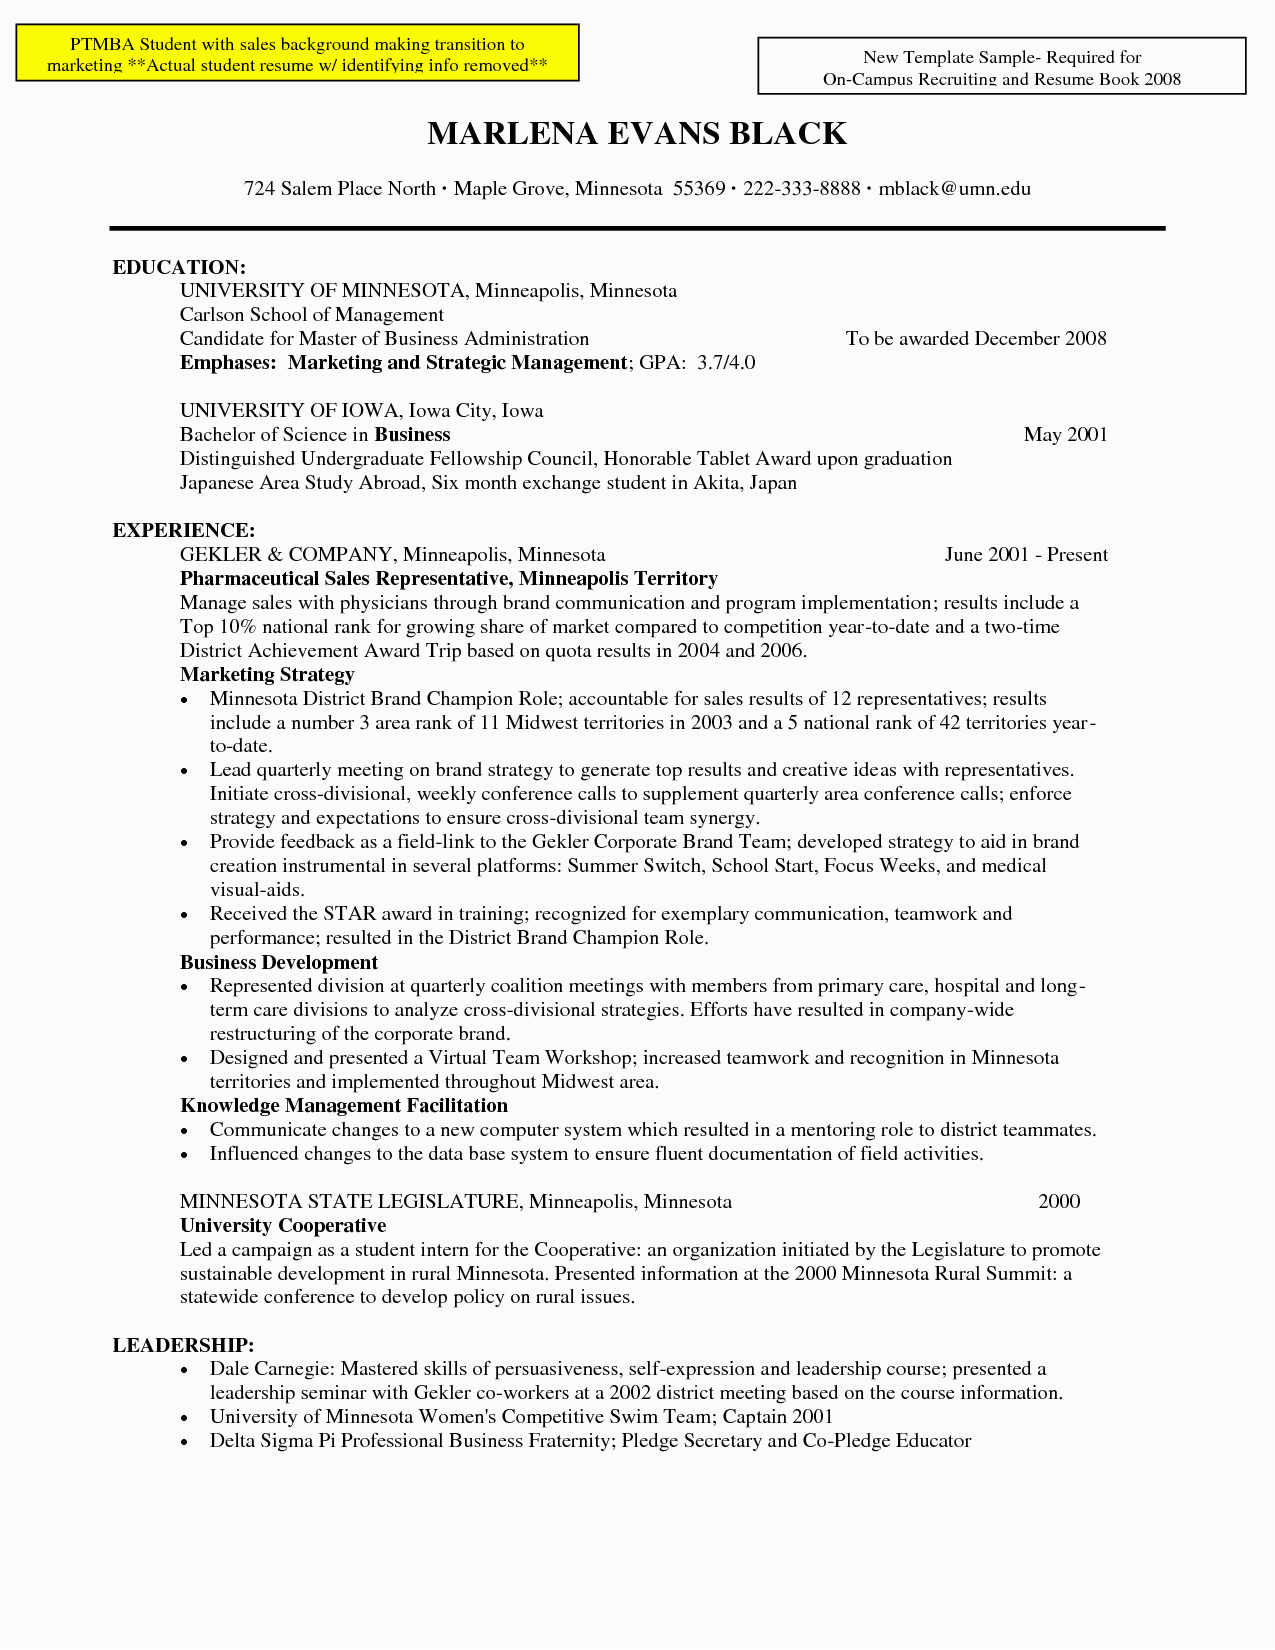 Sample Resume Objective for It Company International Business International Business Objective Resume